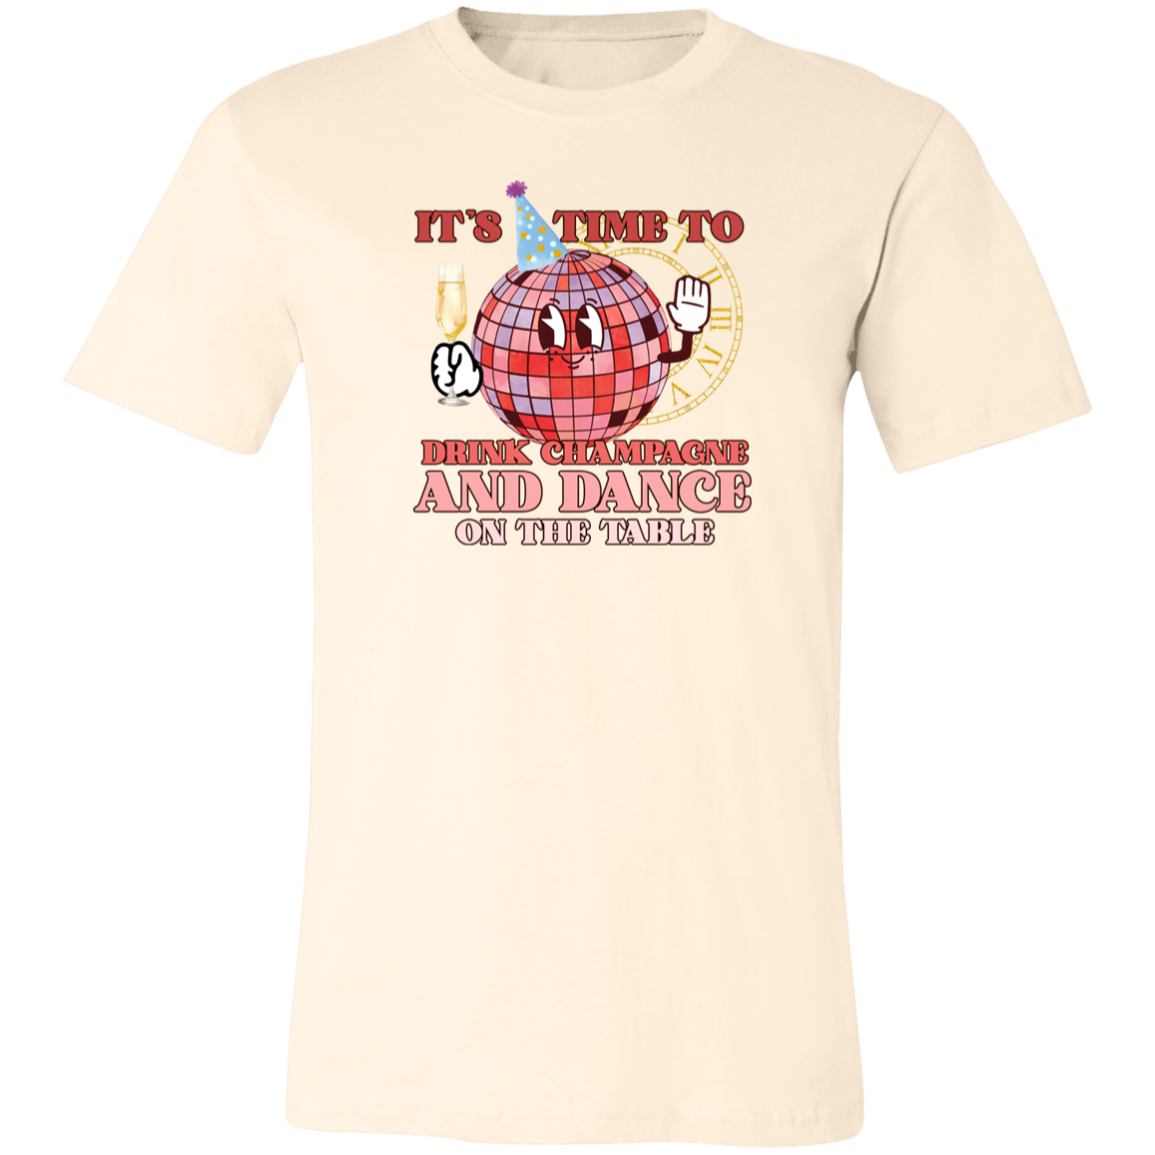 It's Time To Drink Champagne & Dance on the Table Shirt